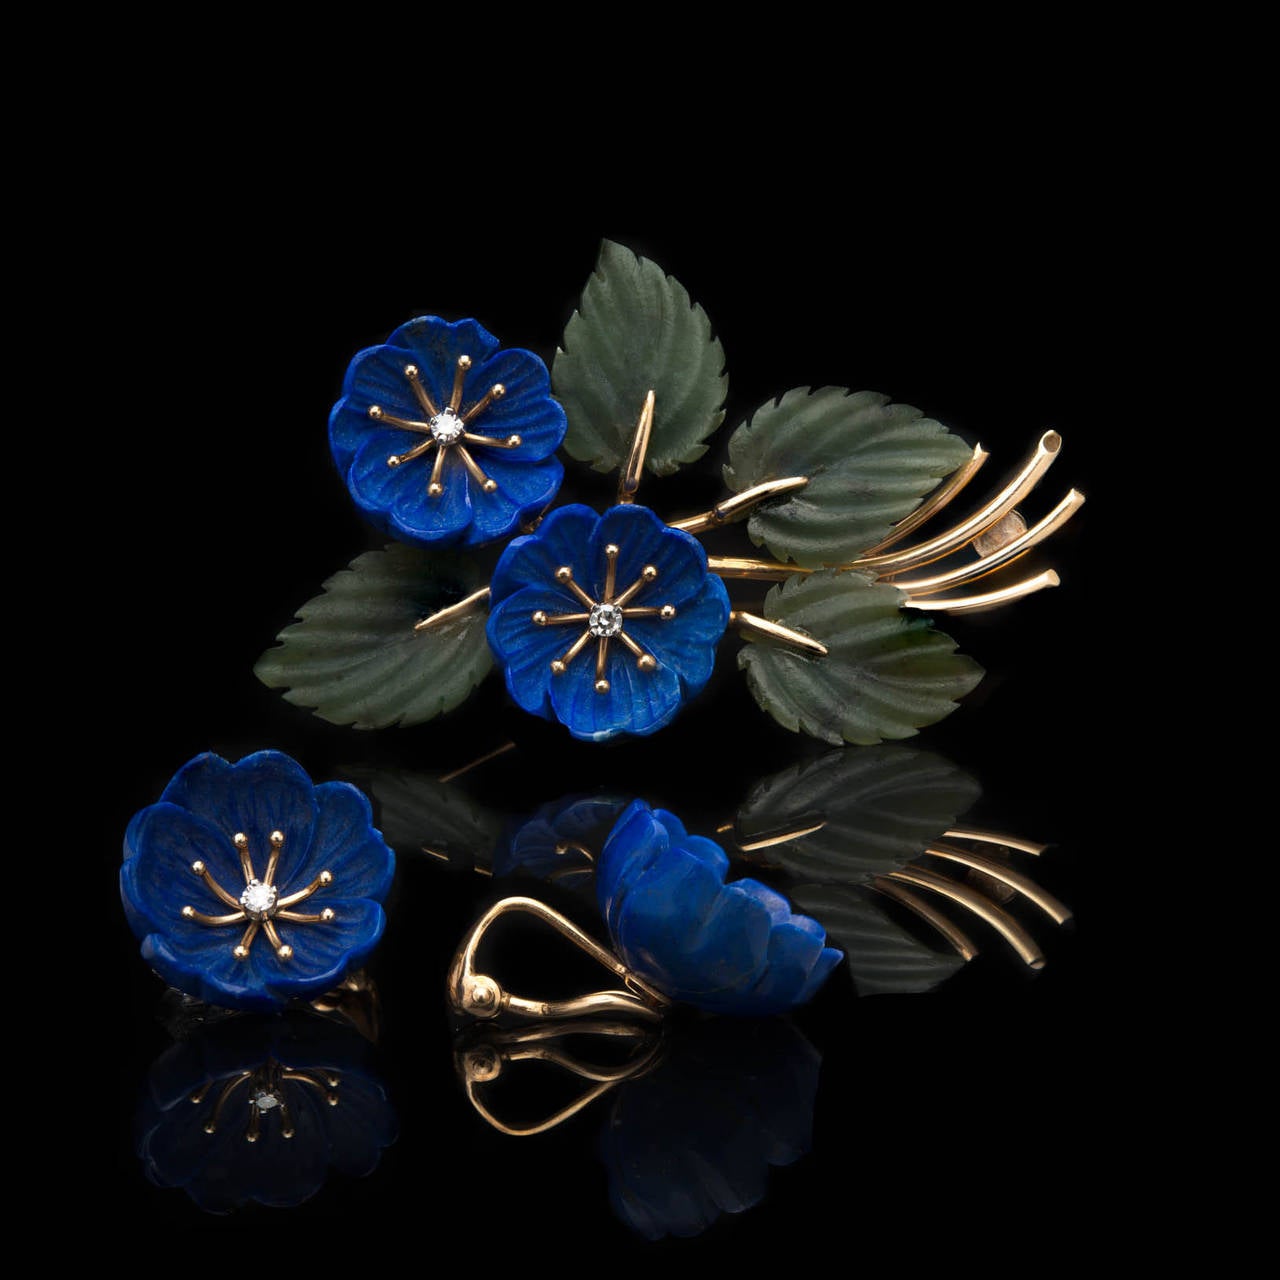 Hand Carved Lapis Lazuli and Nephrite Jade Brooch and Ear Clip Set in 14Kt Yellow Gold with 4 Single Cut Diamonds, from the Legendary San Francisco Gump's Store. The charming mid-century 62 mm long brooch and 8 mm non-pierced ear clips are in their